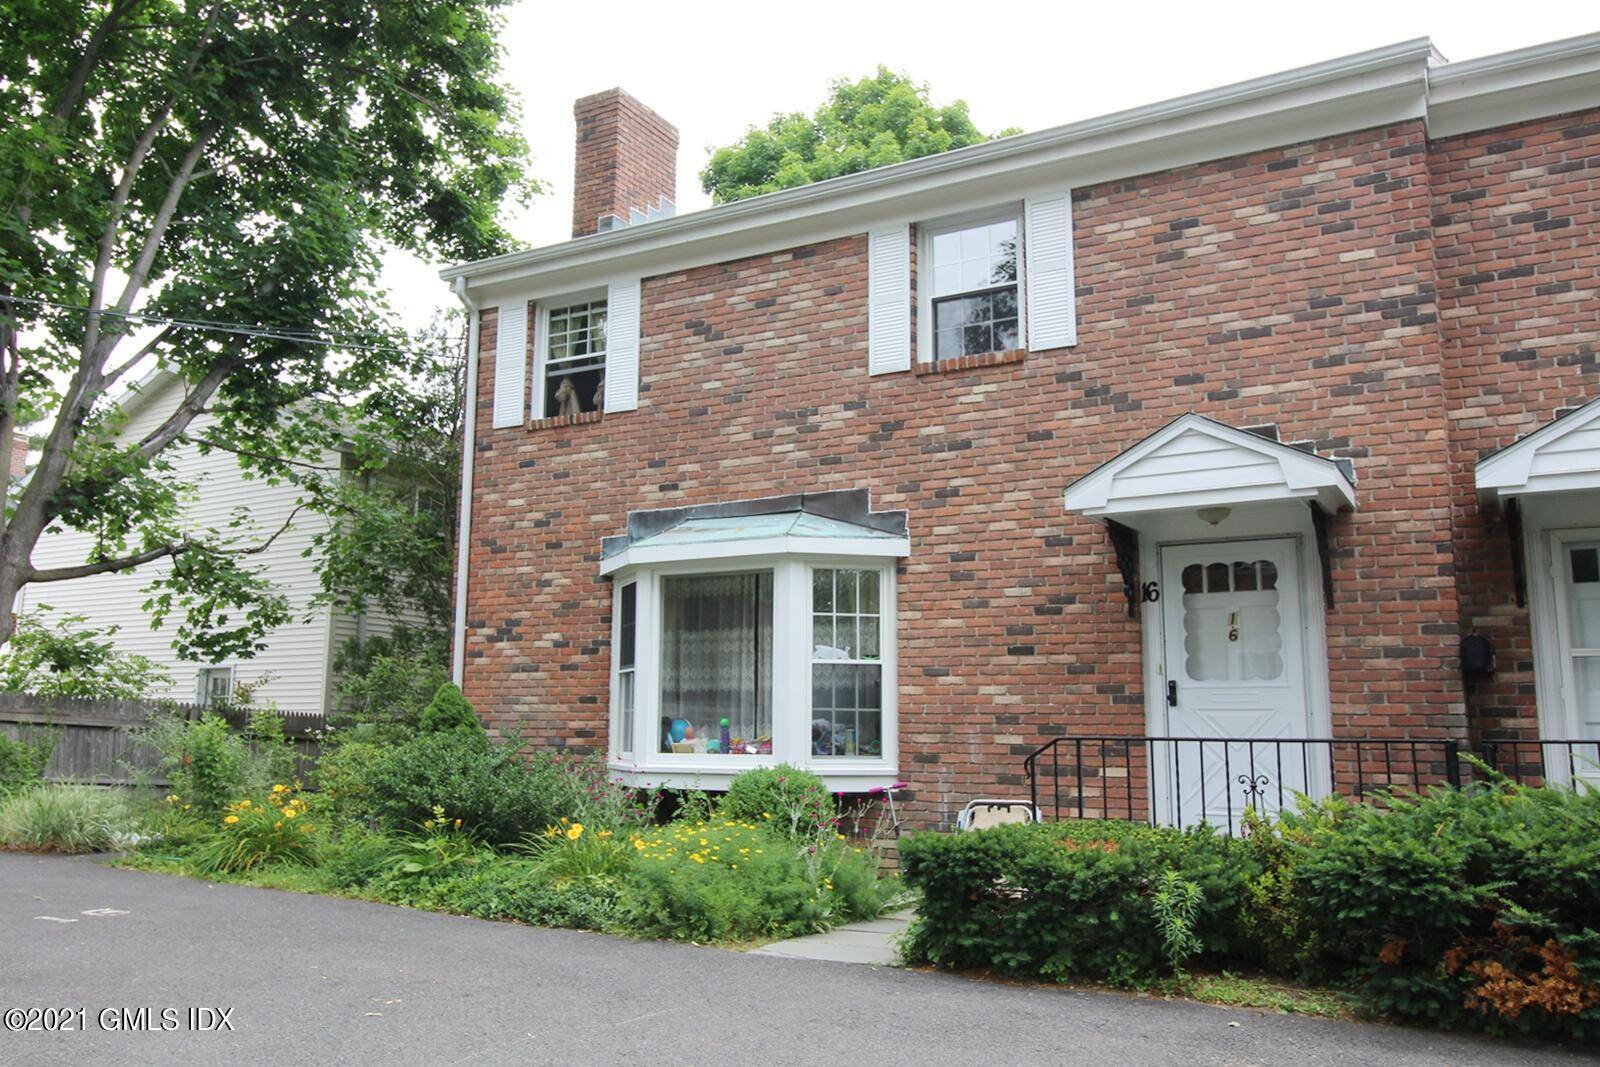 End Unit Townhouse in a Solid Brick Rental Community.